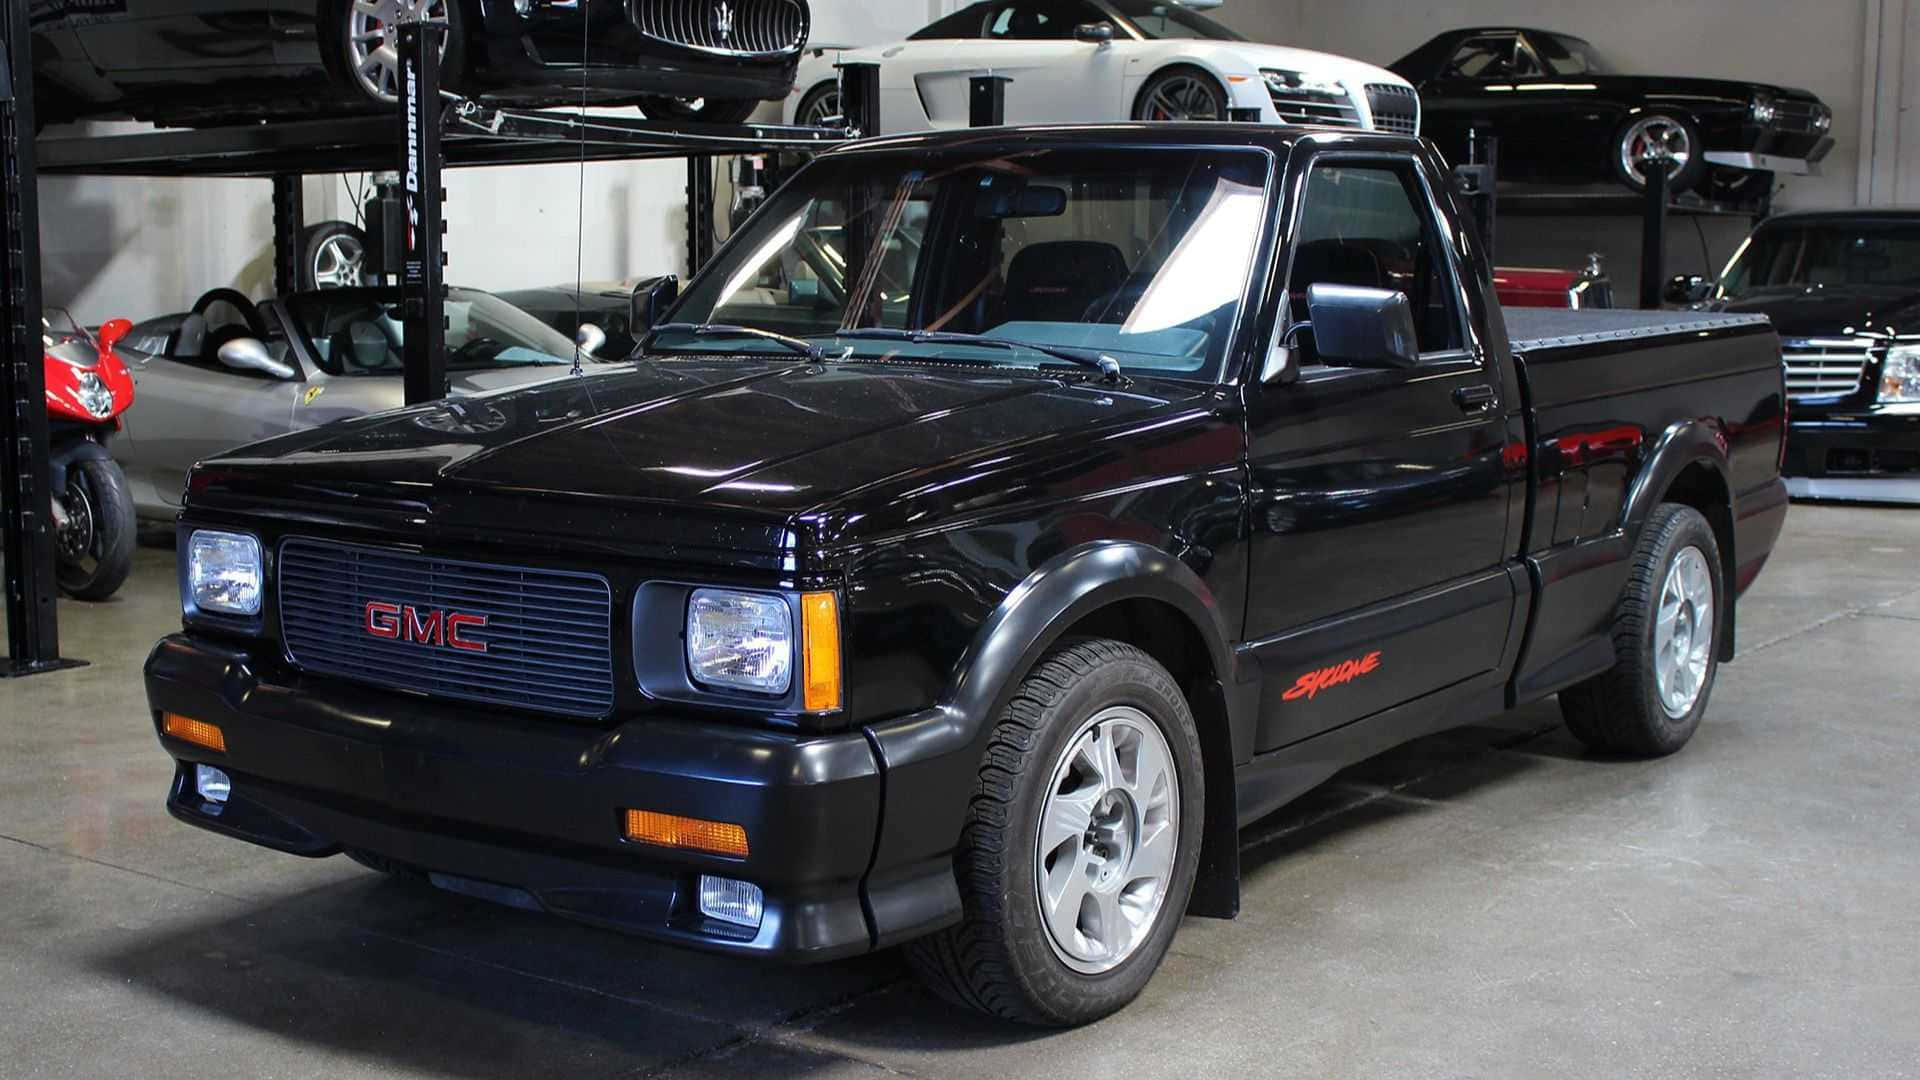 Caption: A Striking View of a GMC Syclone Wallpaper